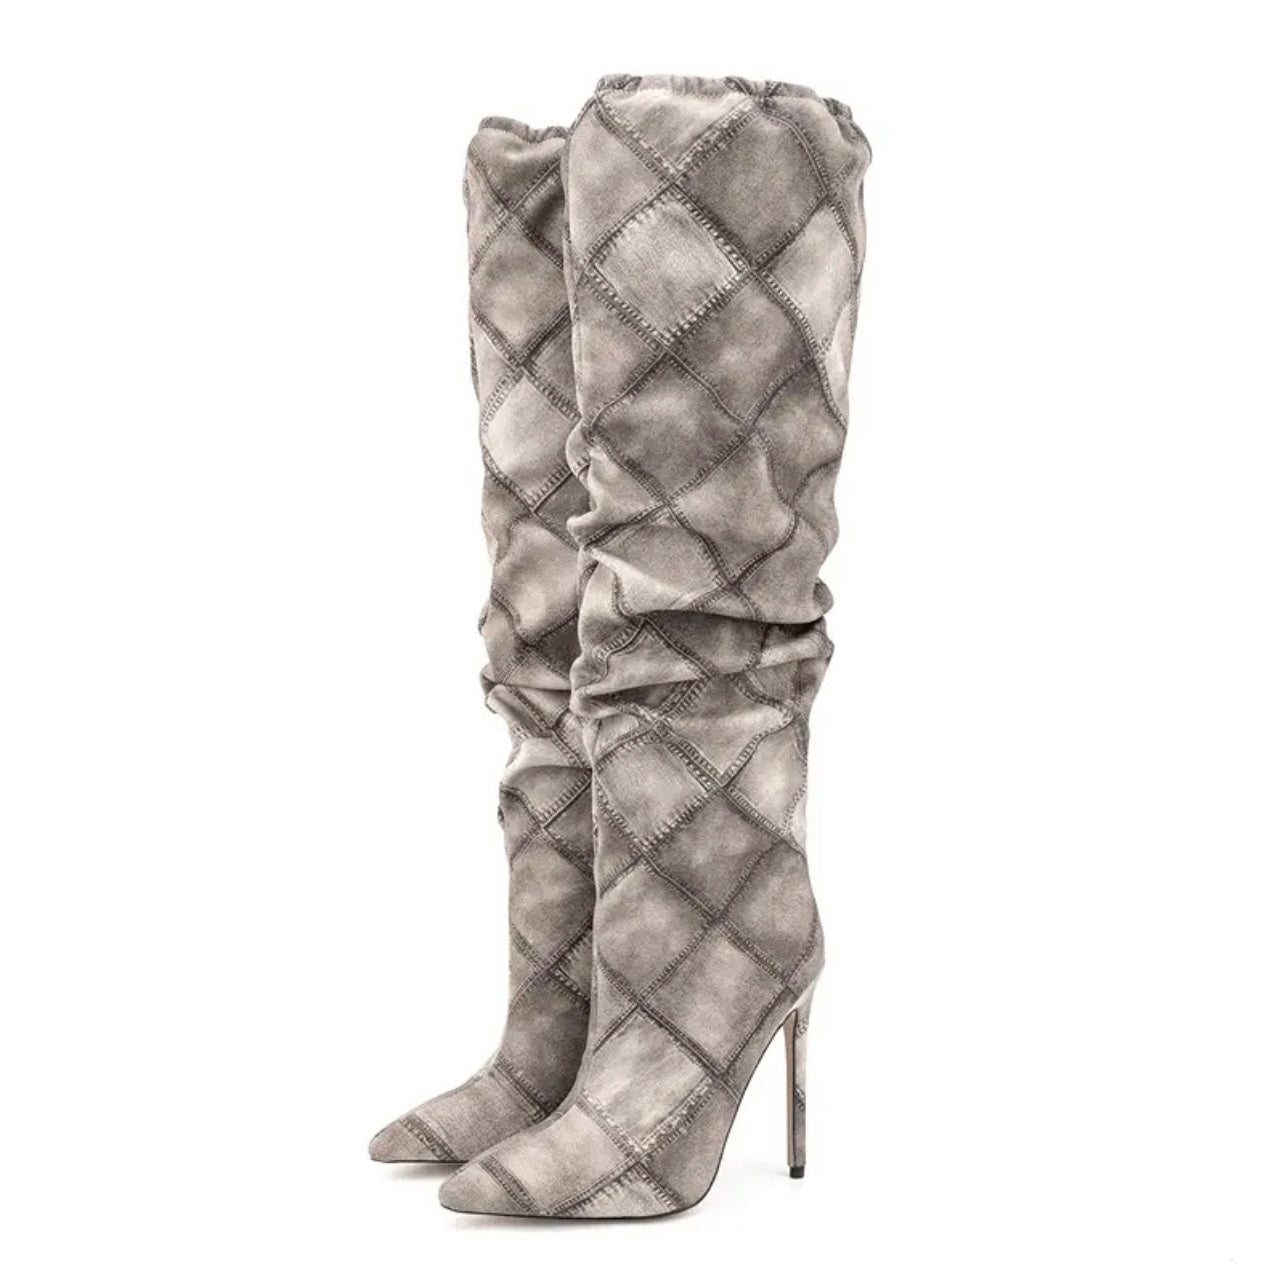 Staying Fabulous Knee High Boots Comes In Other Gorgeous Colors (Preorder Ships 2/29)